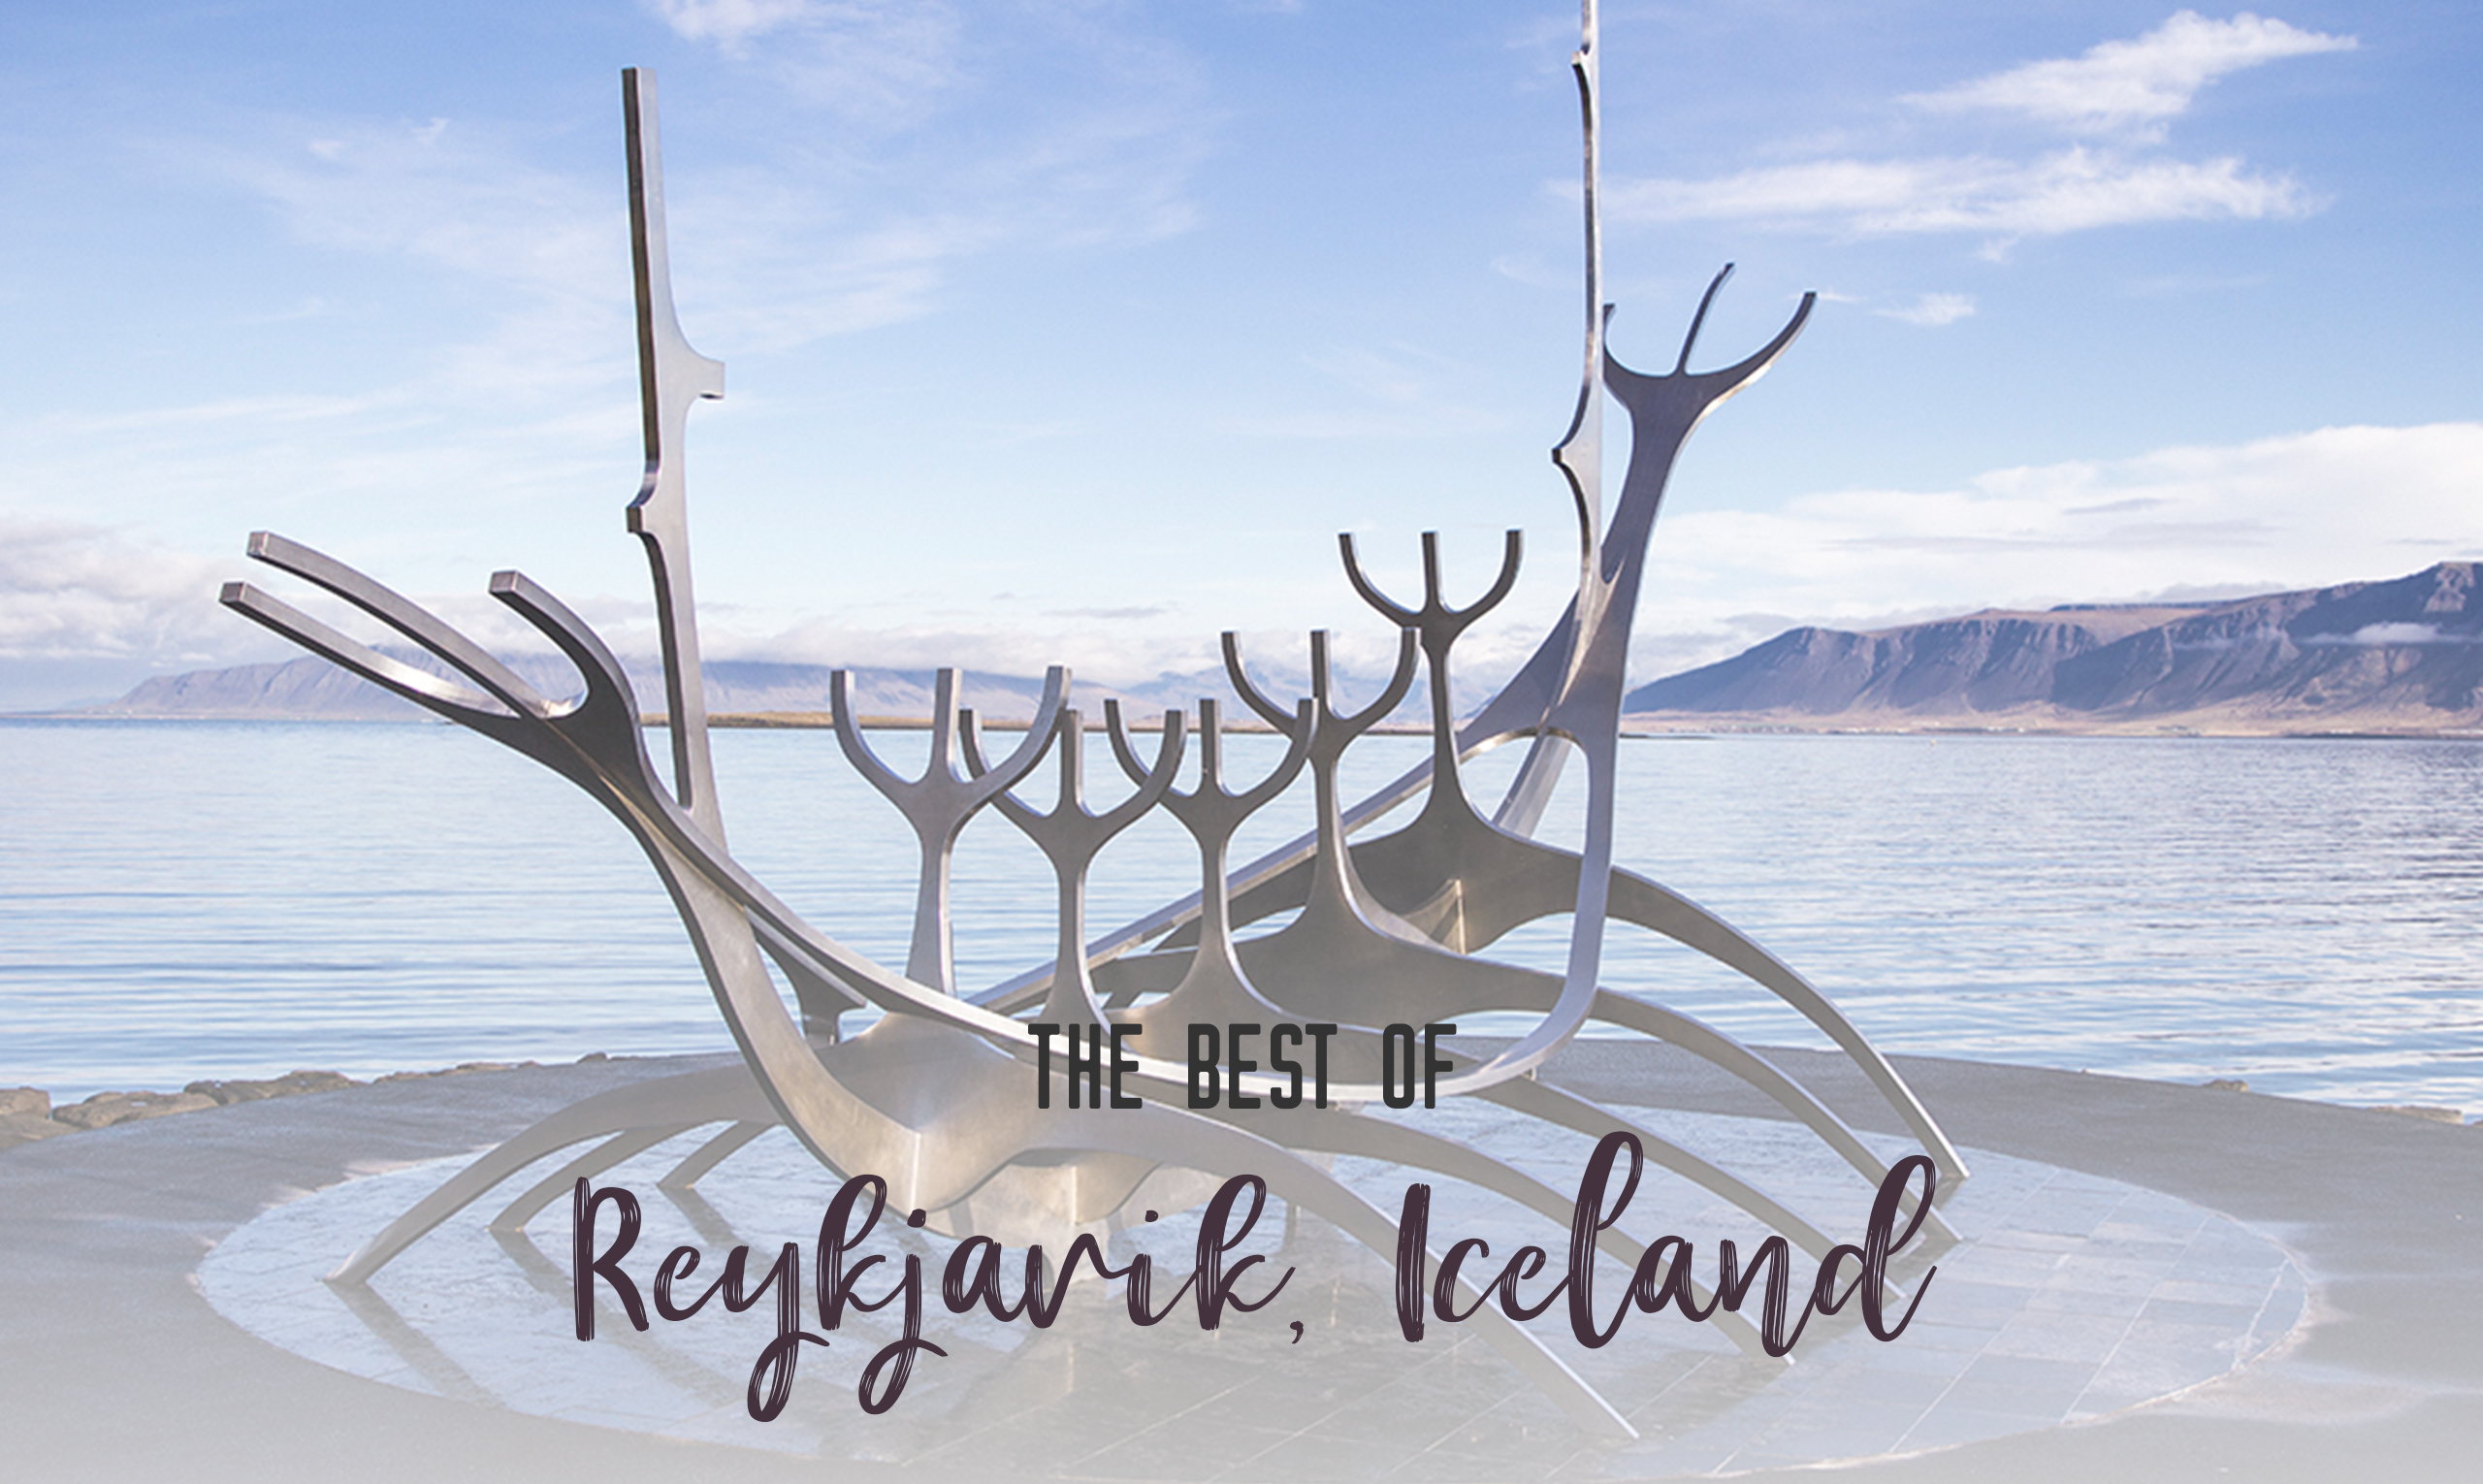 Best of Reykjavik, Iceland | Visit Iceland’s capital city, Reykjavik. Find the best places to the eat, see and explore in this nordic town. Discover the best of Reykjavik, Iceland | My Wandering Voyage travel blog